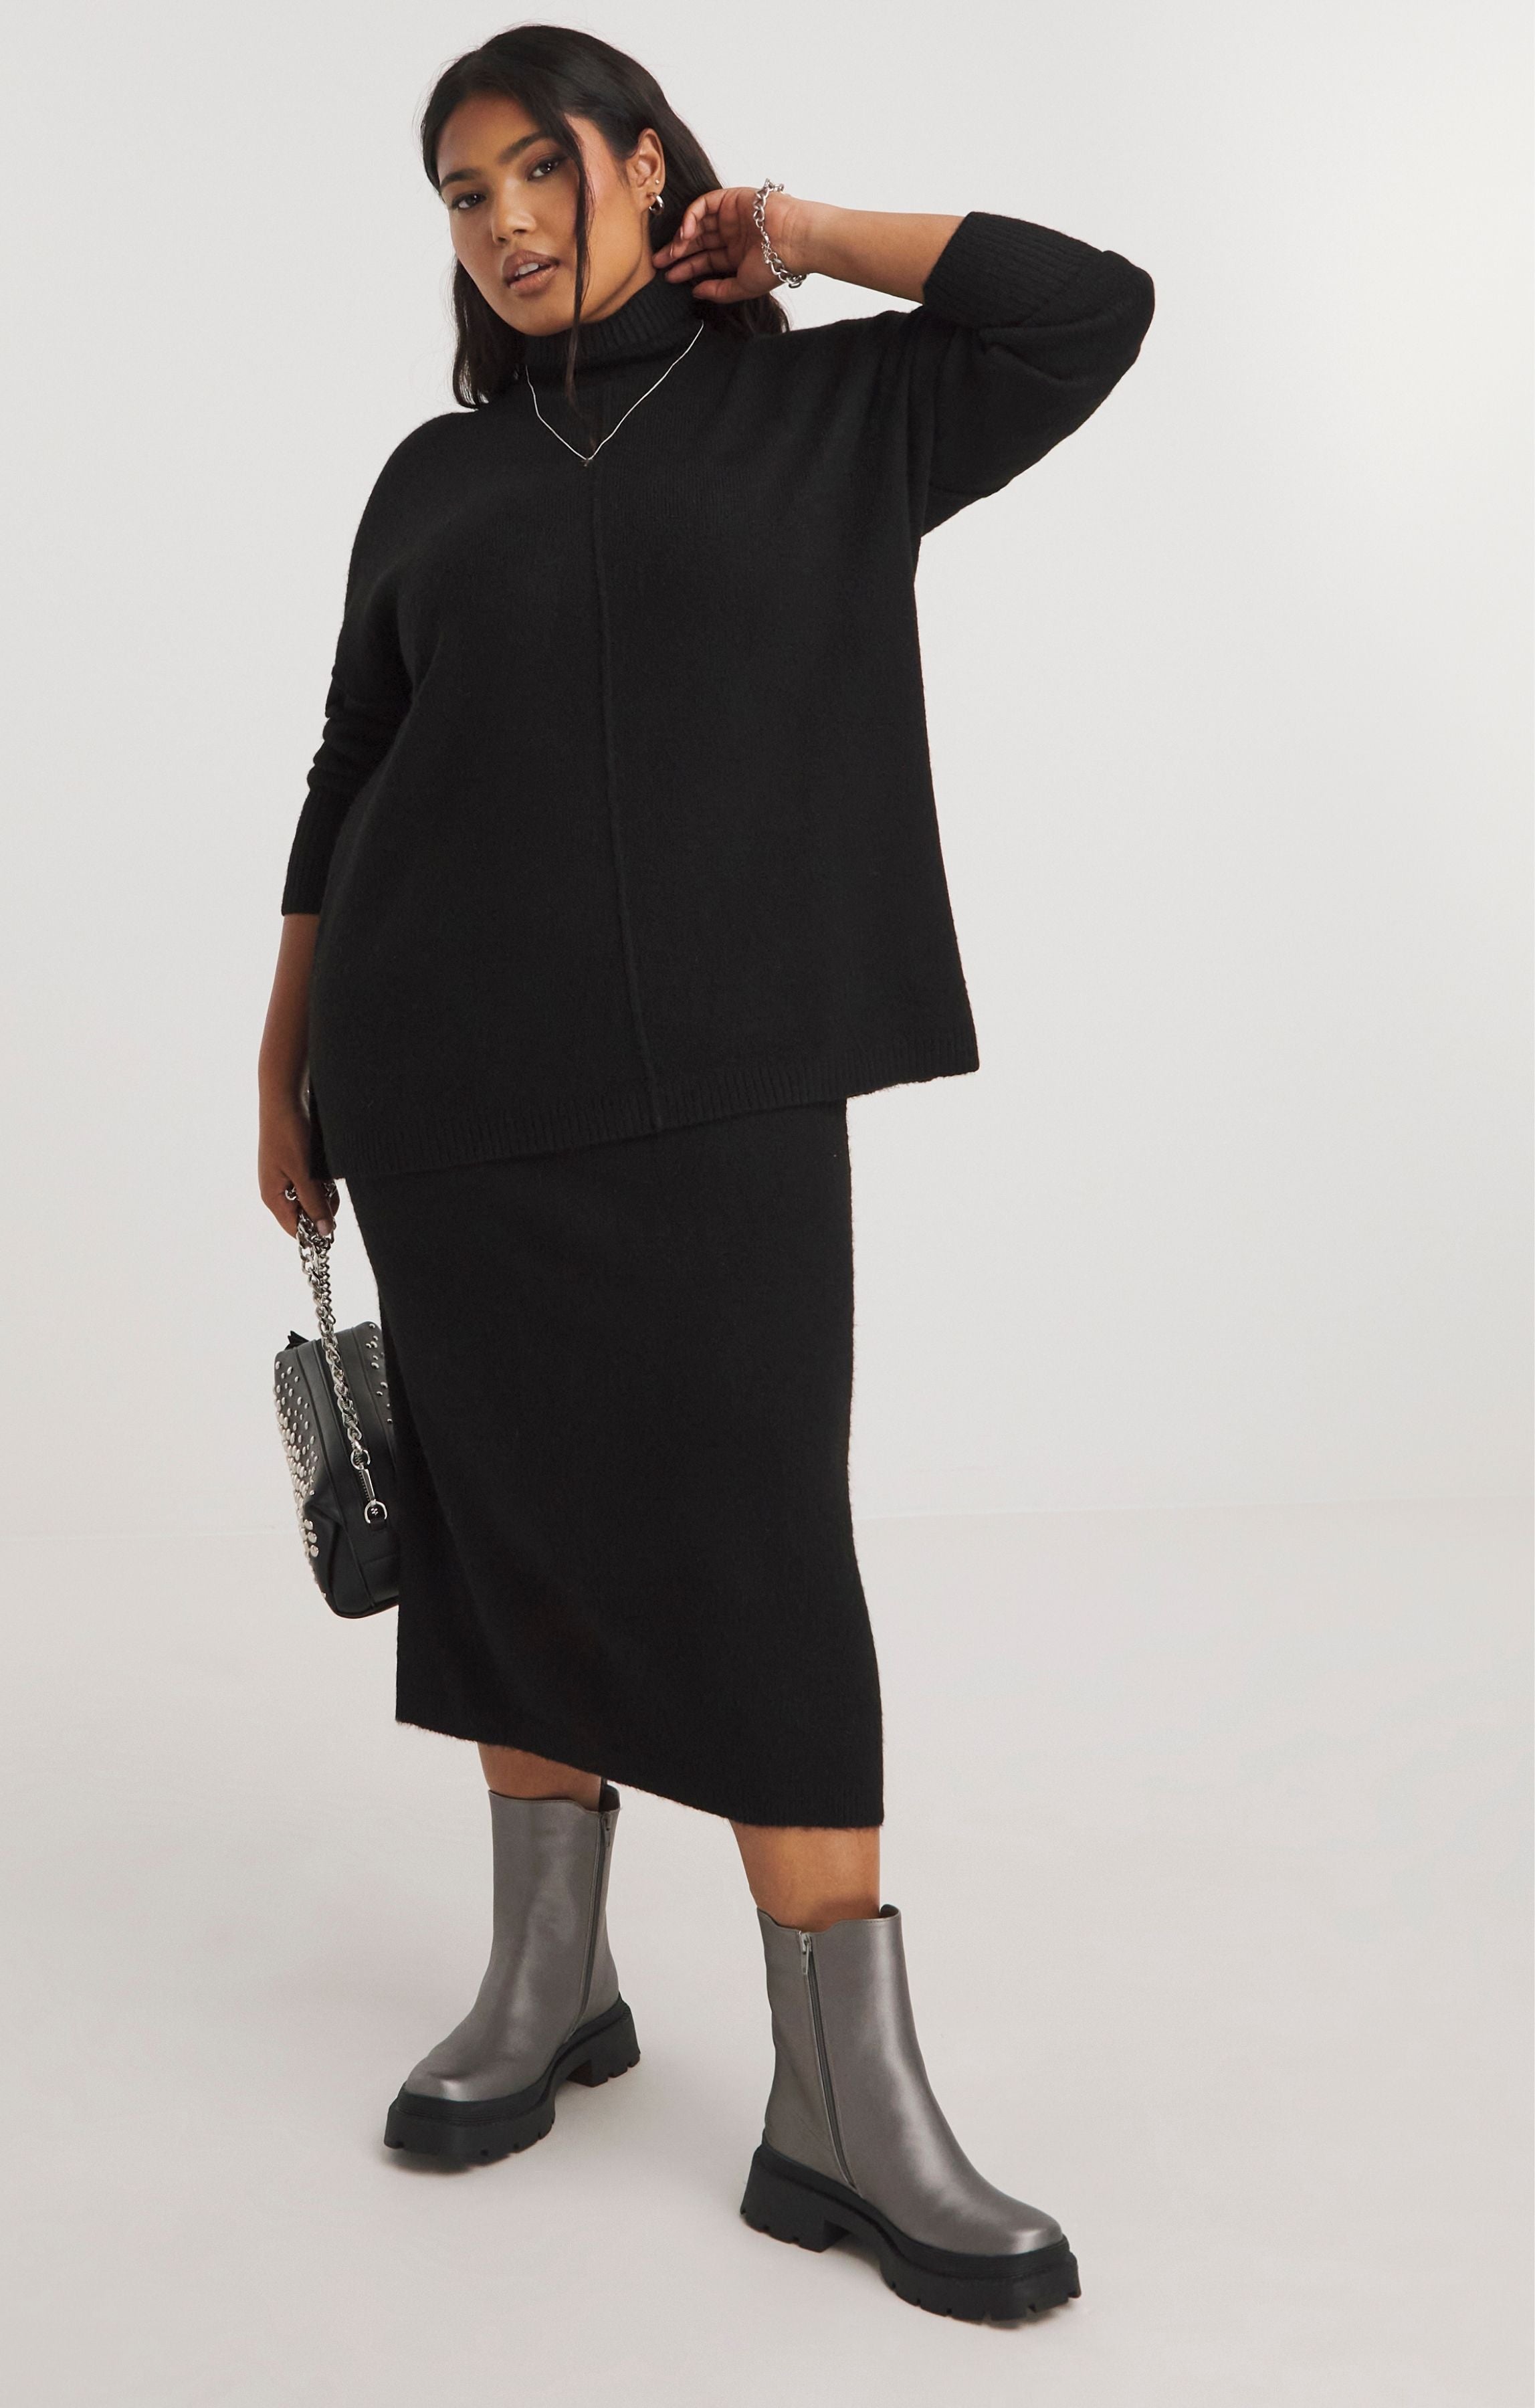 Simply Be Black Roll Neck Longline Jumper product image